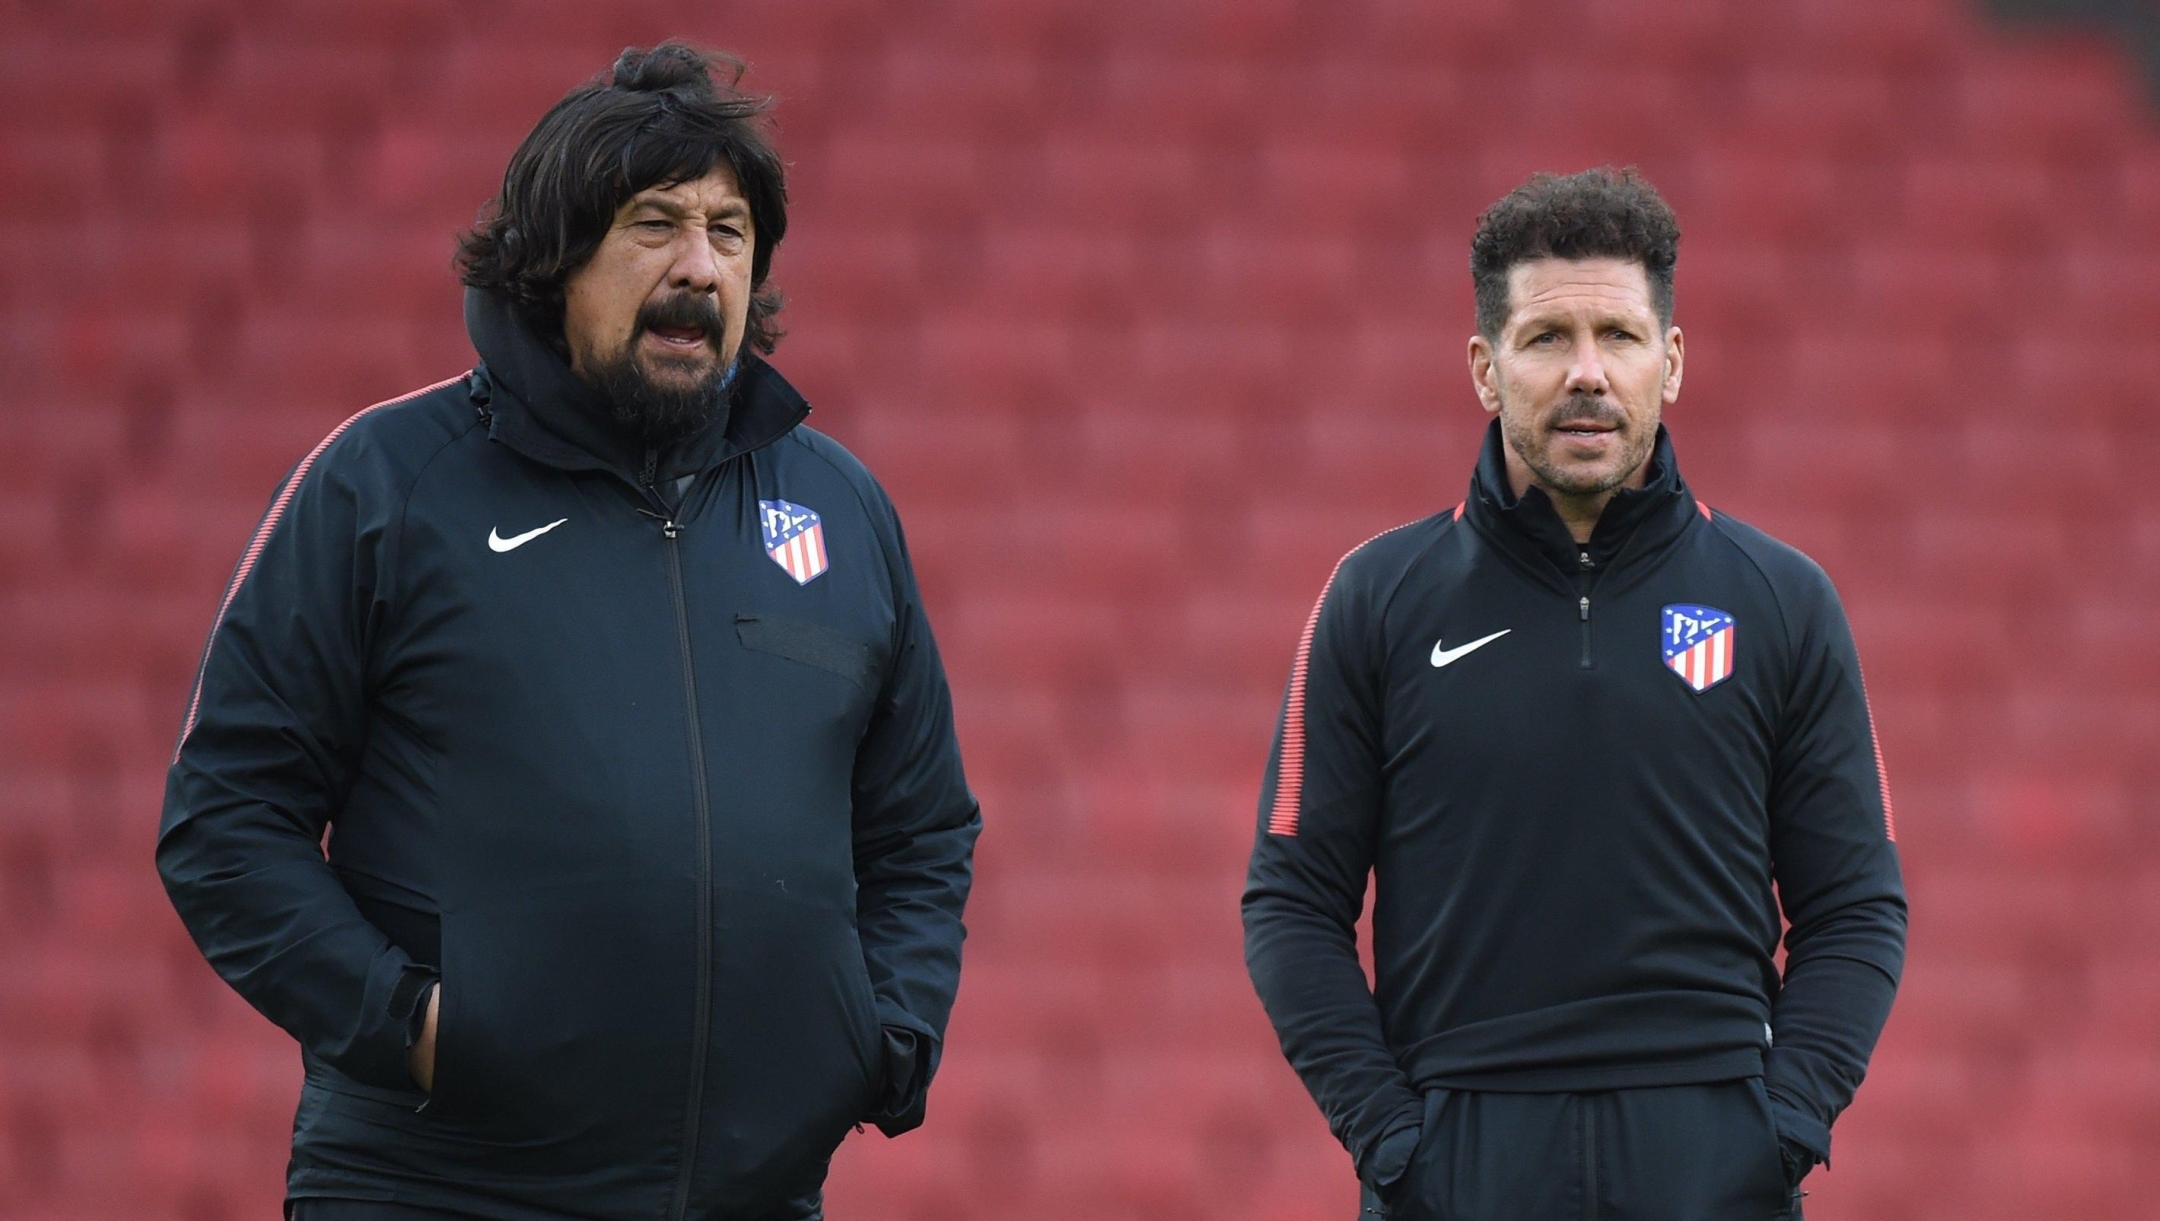 epa06692557 Atletico Madrid manager Diego Simeone (R) and his assistant manager German Burgos (L) lead a training session at Emirates stadium in London, Britain, 25 April 2018. Atletico Madrid will face Arsenal FC in their UEFA Europa League semi final, first leg soccer match on 26 April 2018.  EPA/FACUNDO ARRIZABALAGA